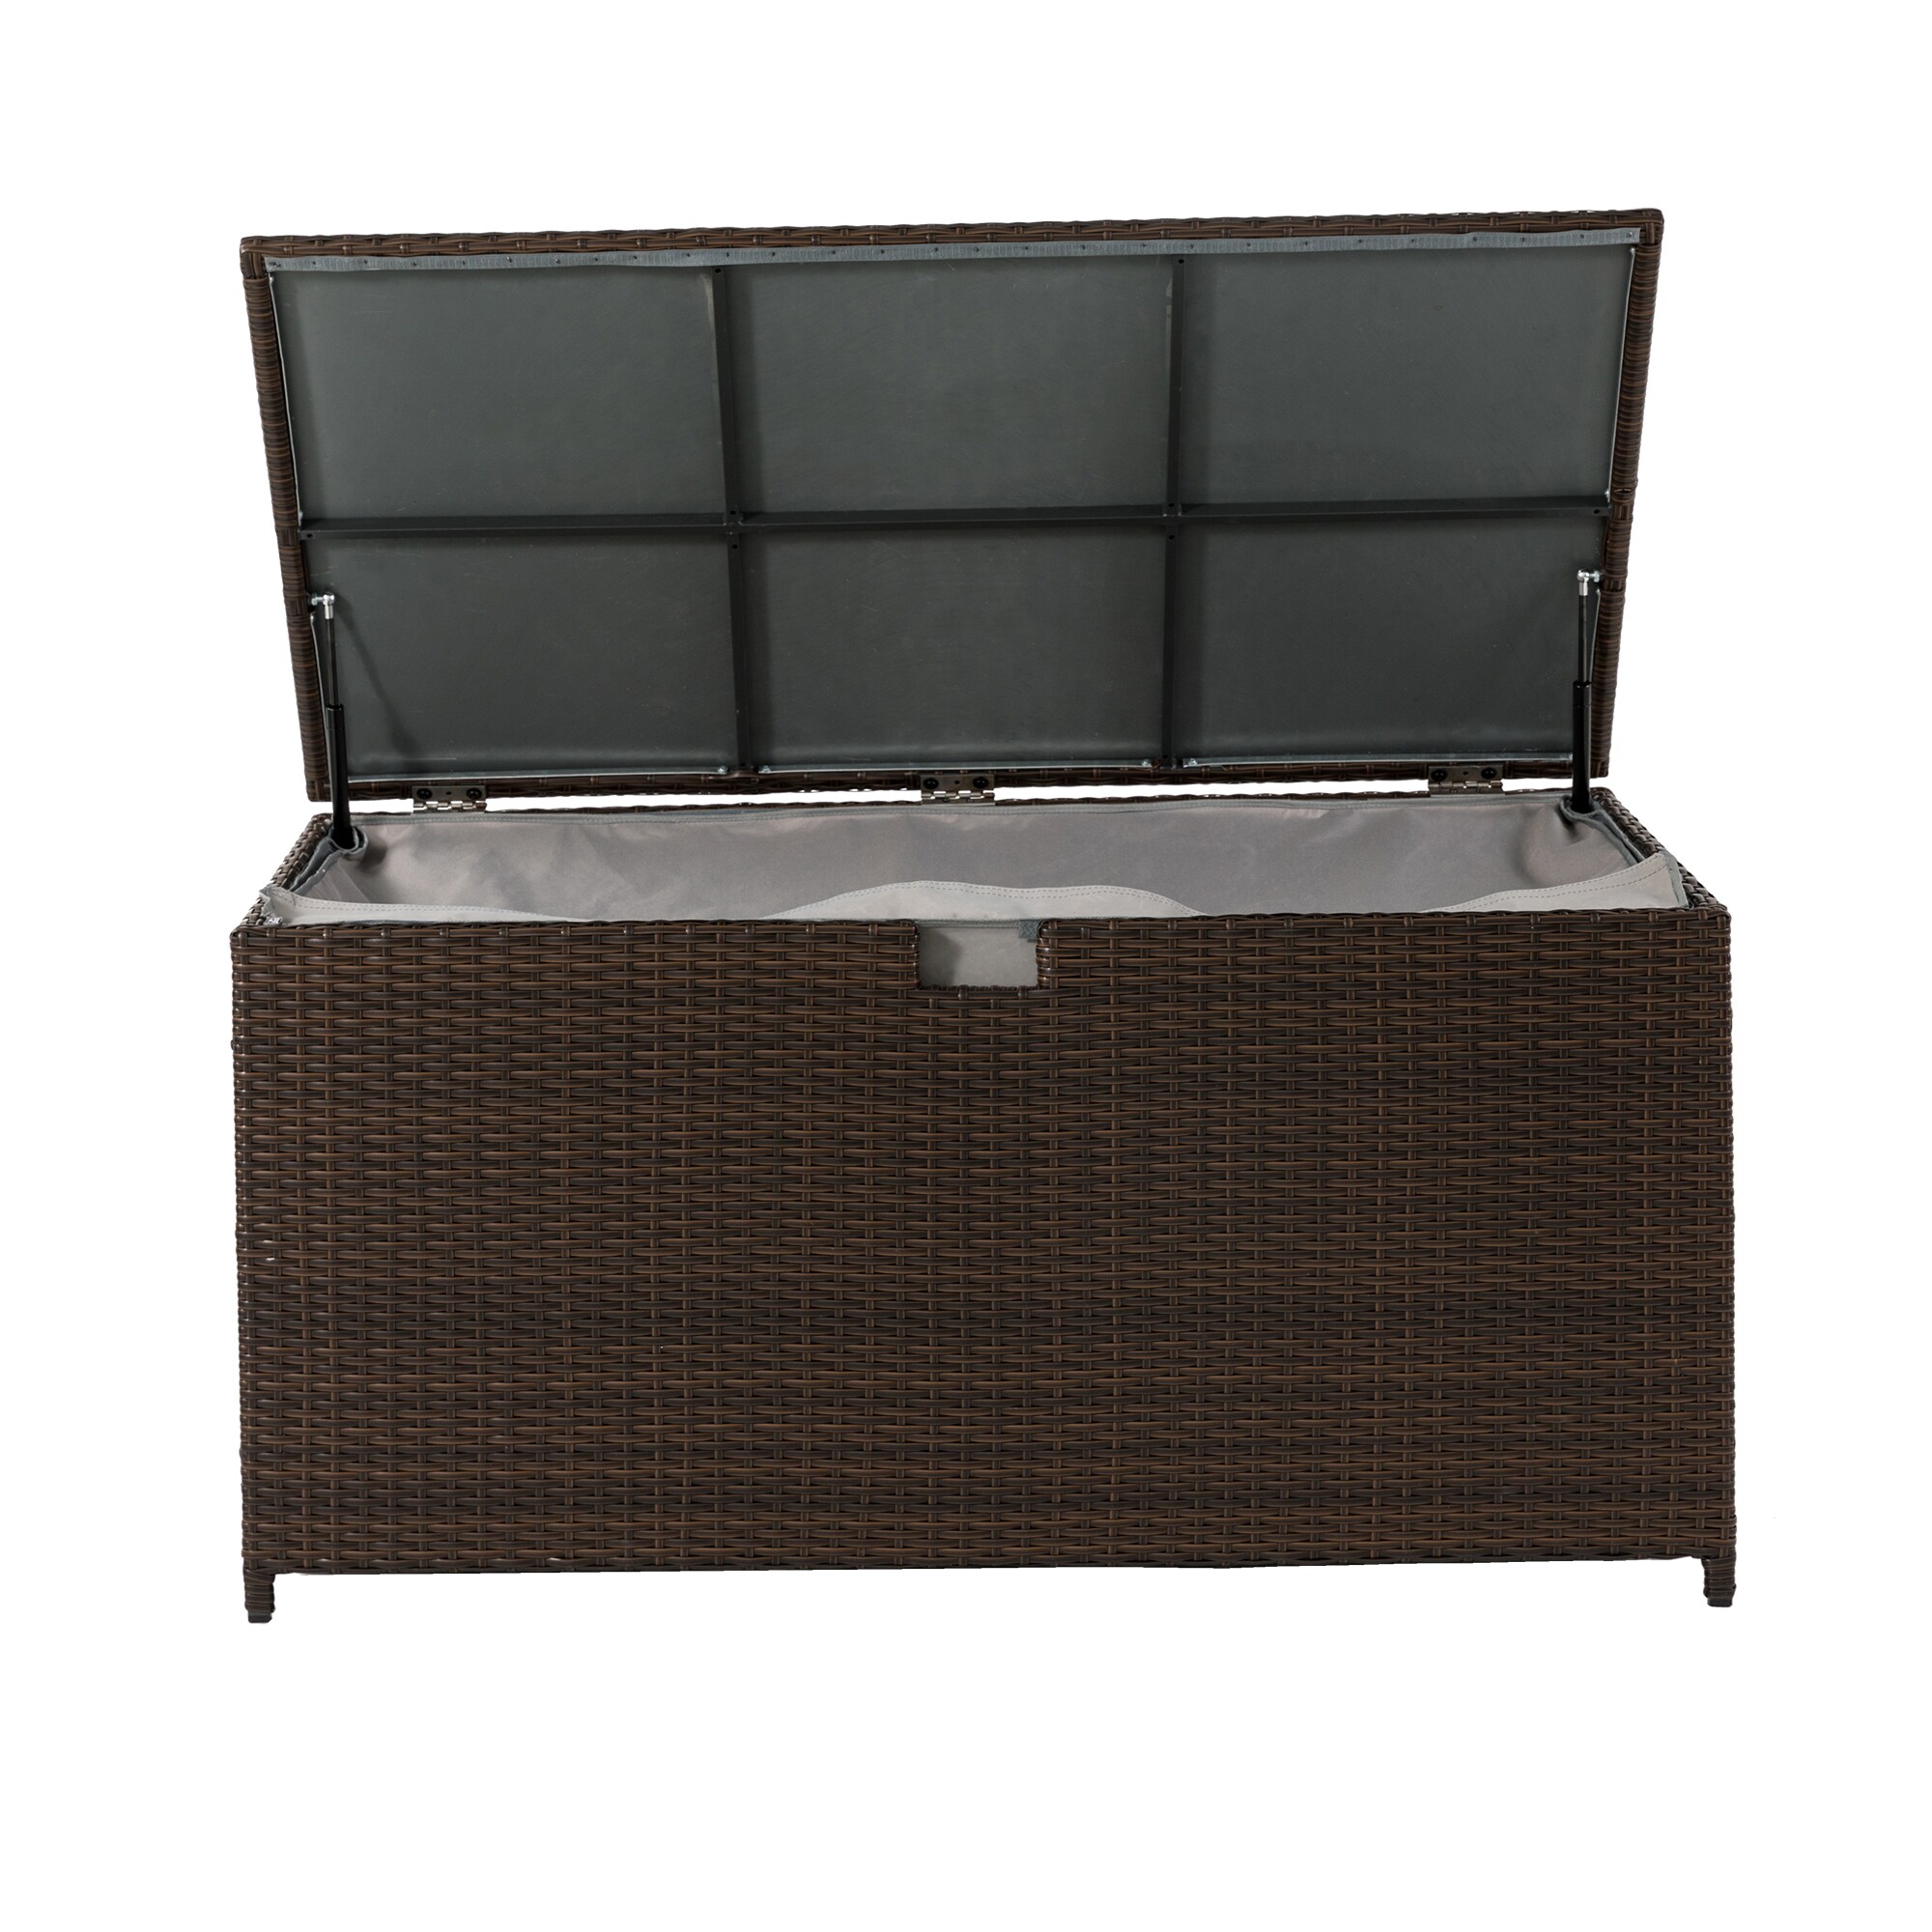 Glitzhome Outdoor Wicker Storage Box Brown Patio Cushion Storage Bin Deck Box for Cabinet and Coffee Table,140 Gallons 